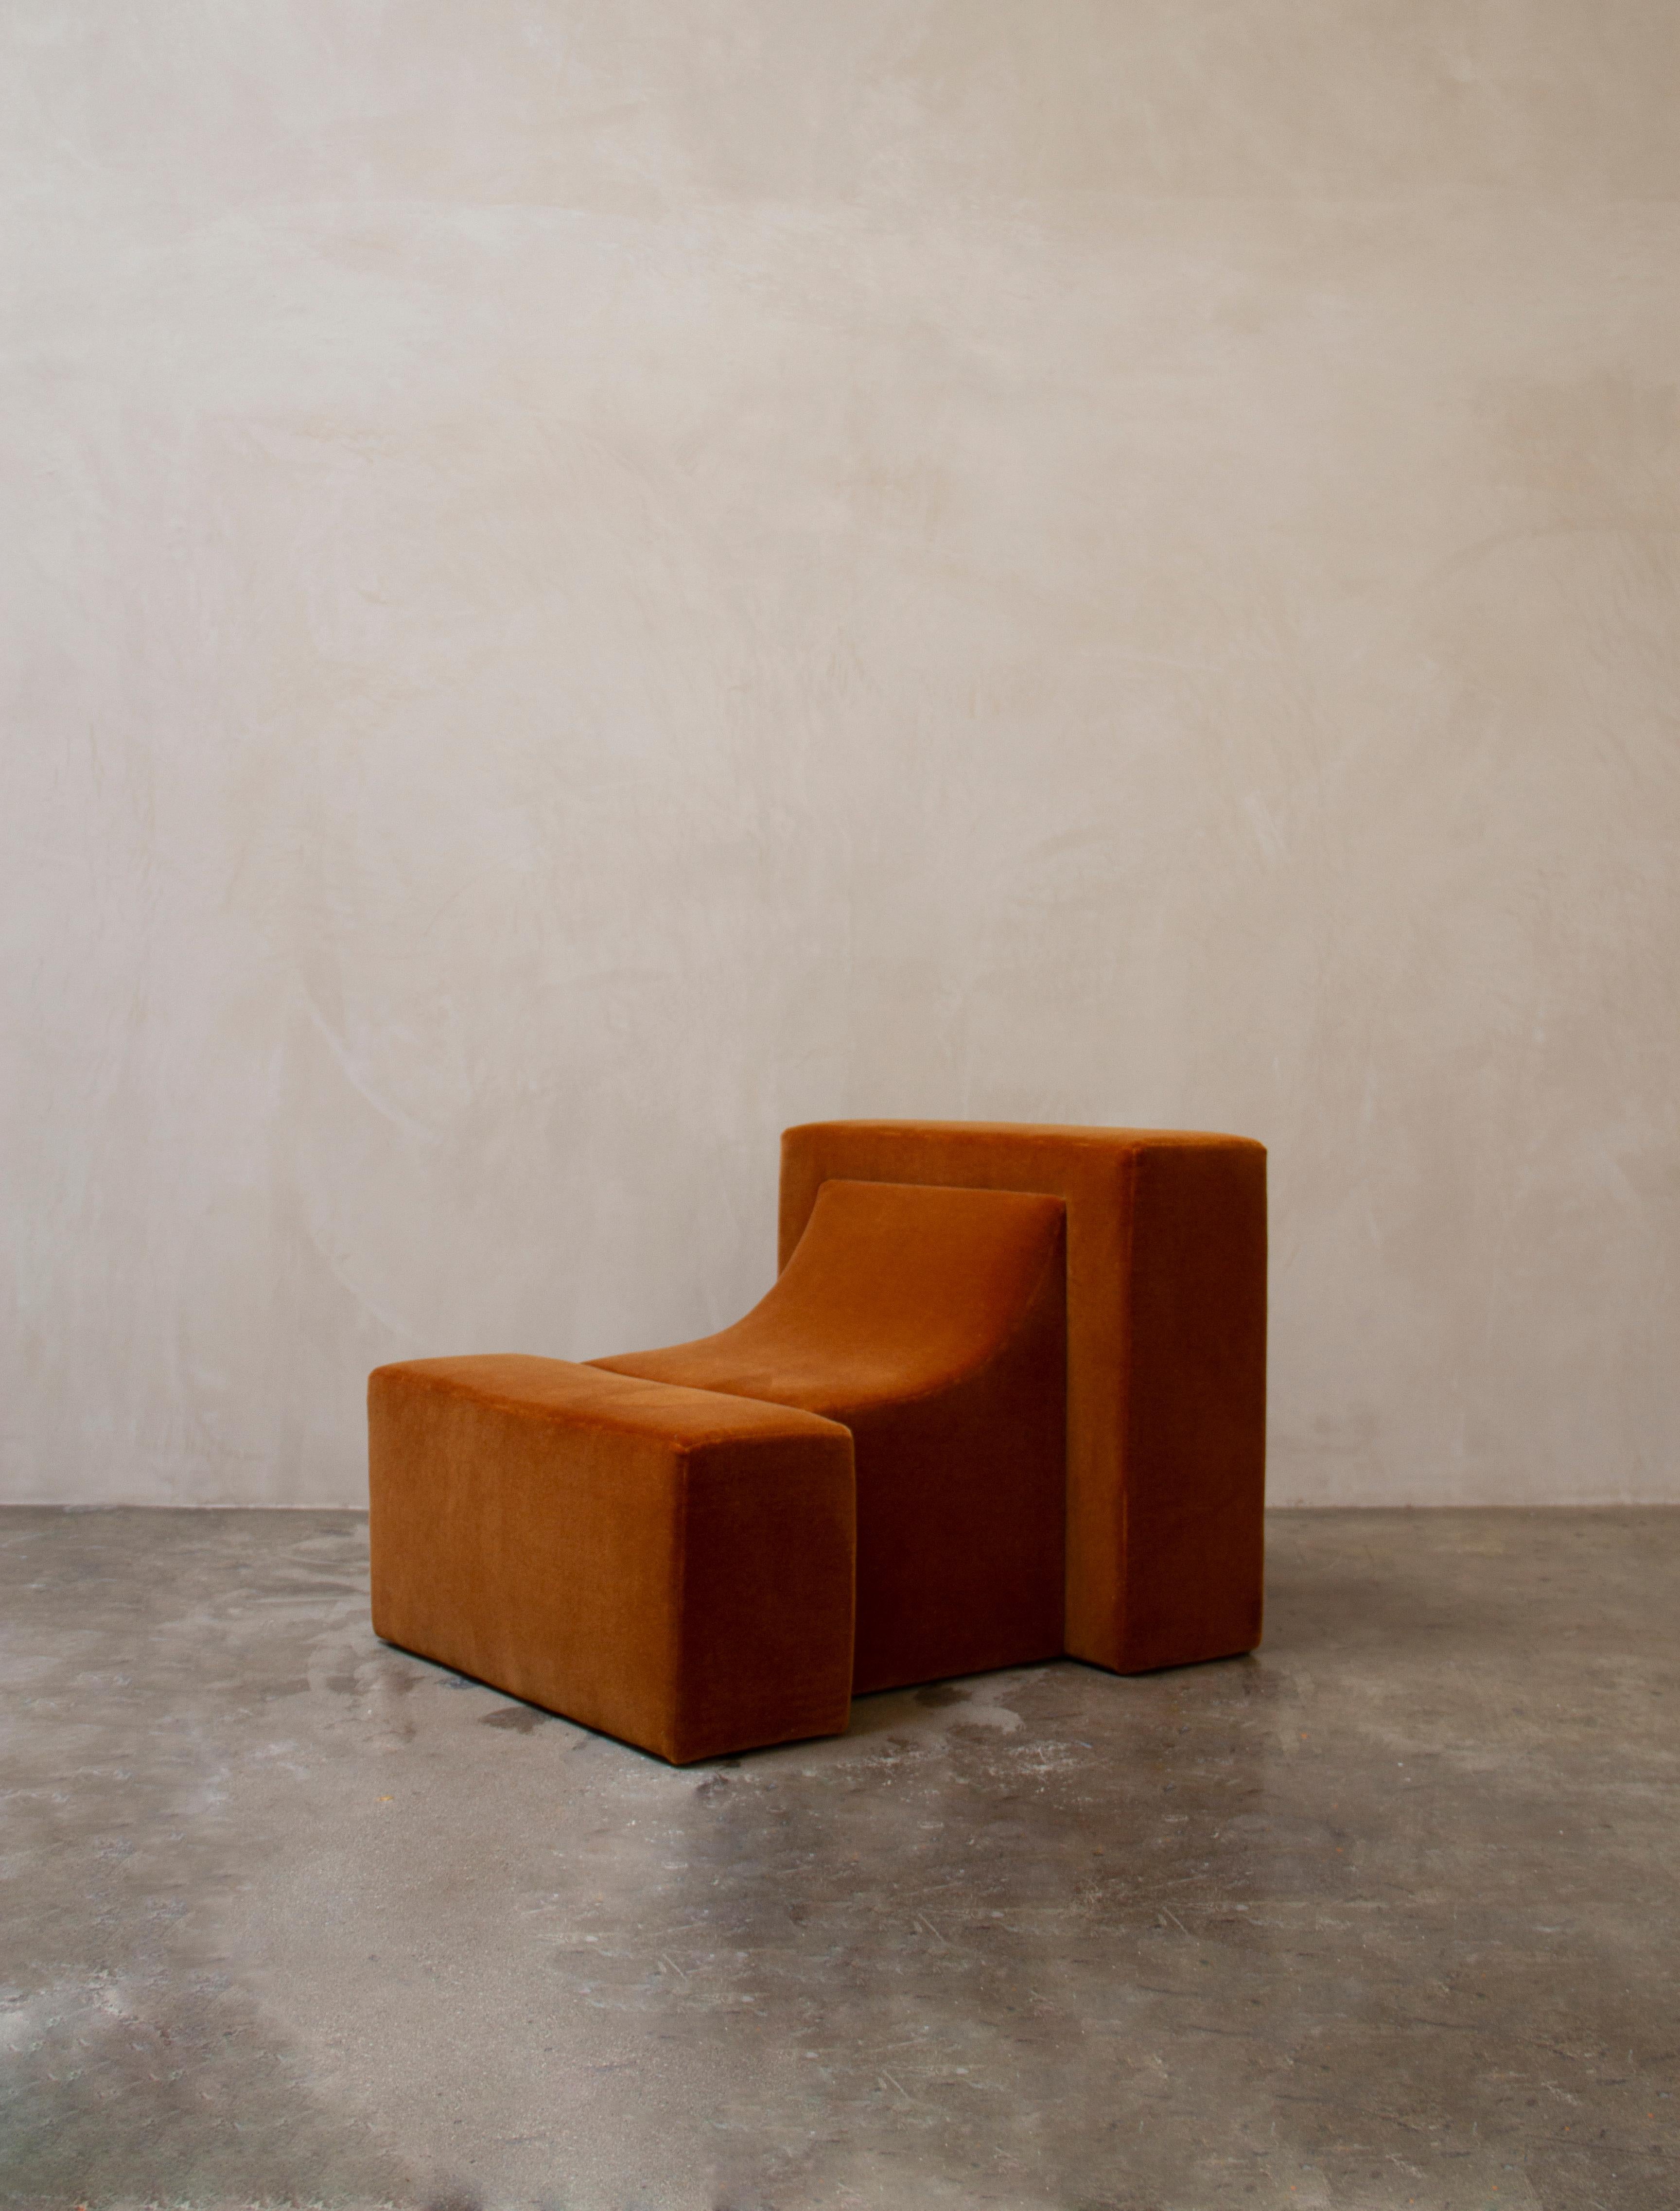 Block chair by Estudio Persona
Dimensions: W 76.2 x D 91.44 x H 66.04 cm
Materials: Mohair Fabric

Upholstered lounge chair. Shown in mohair fabric.
Also available in COM.
Customizations available.

Estudio Persona was created by Emiliana